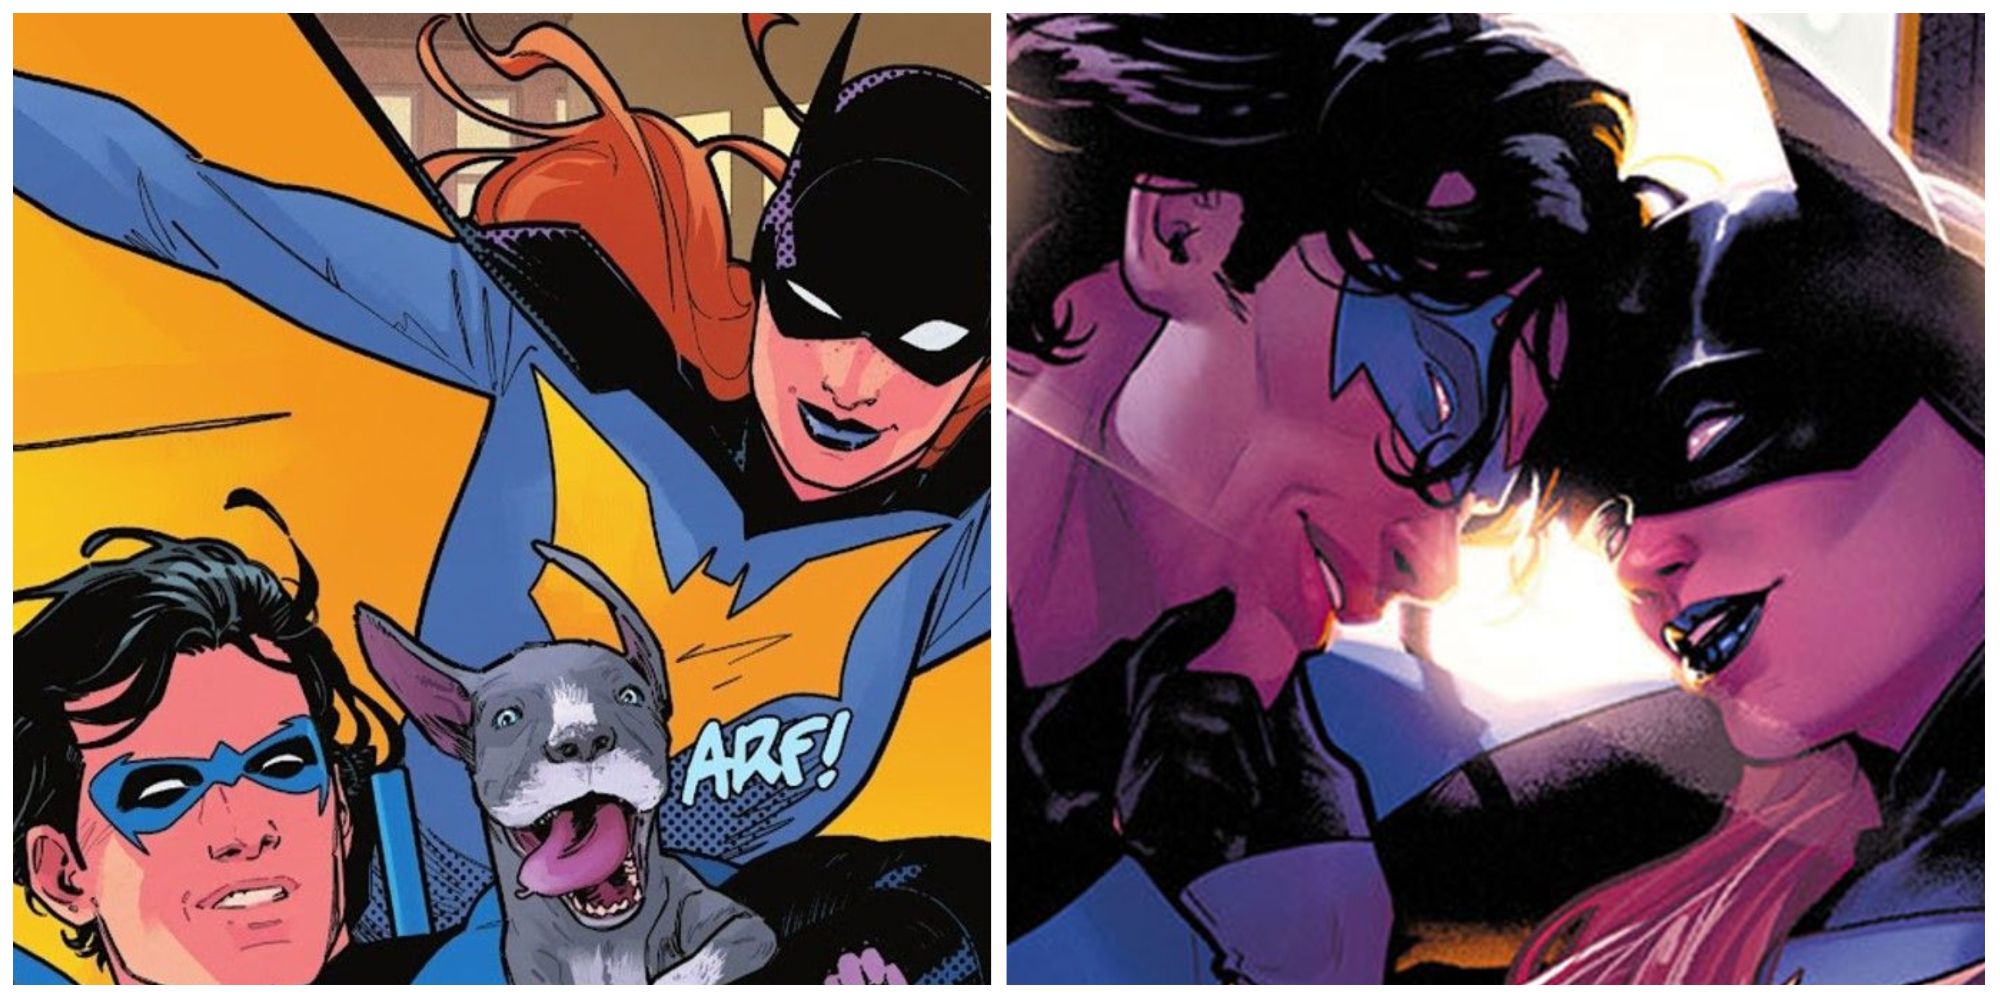 A split image of Nightwing & Batgirl together in DC Comics